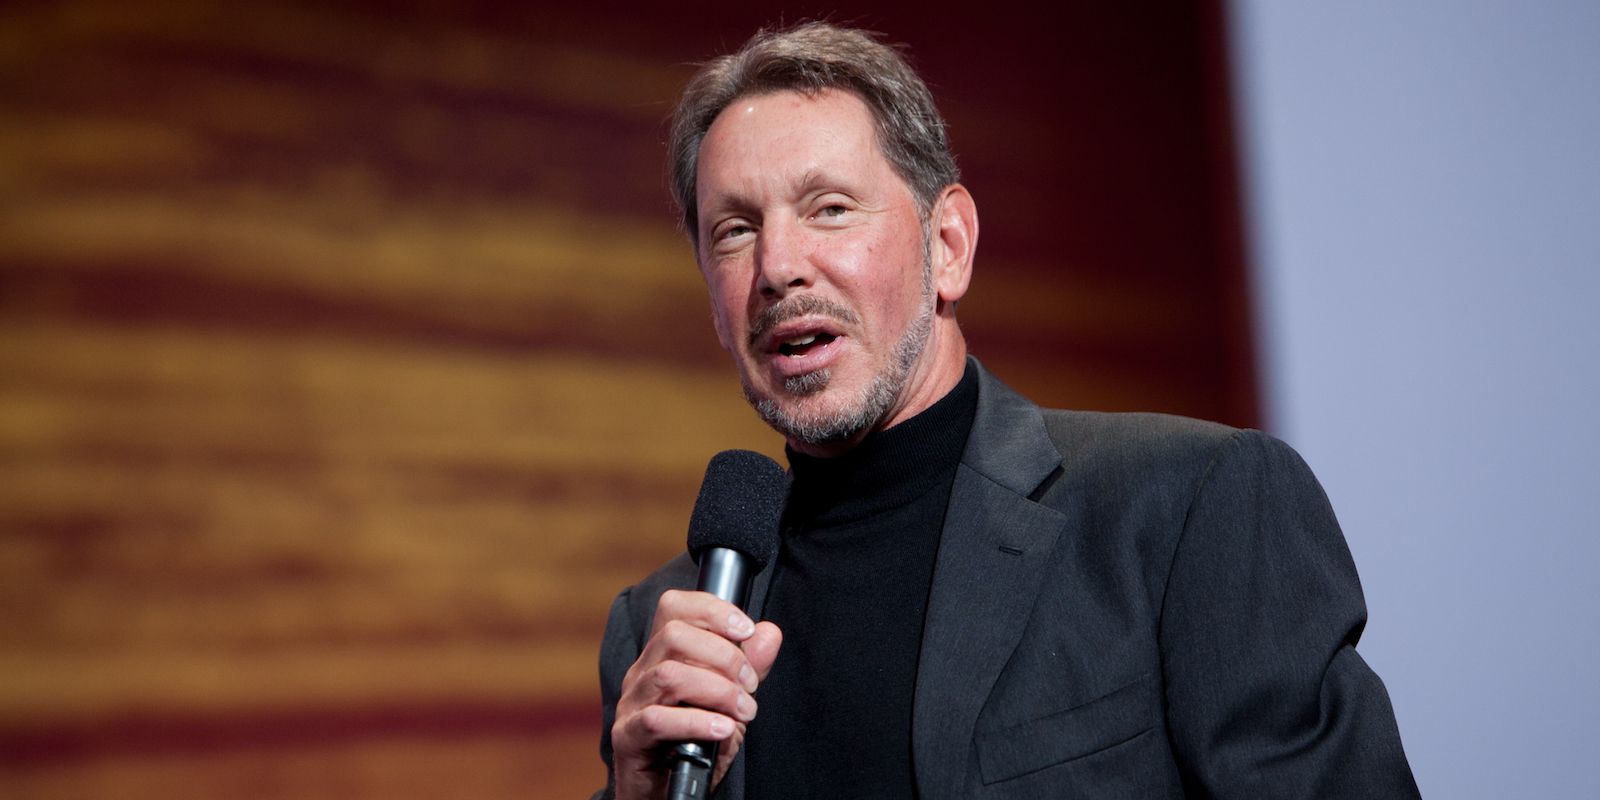 Larry Ellison Speaking on Stage at Event With Microphone